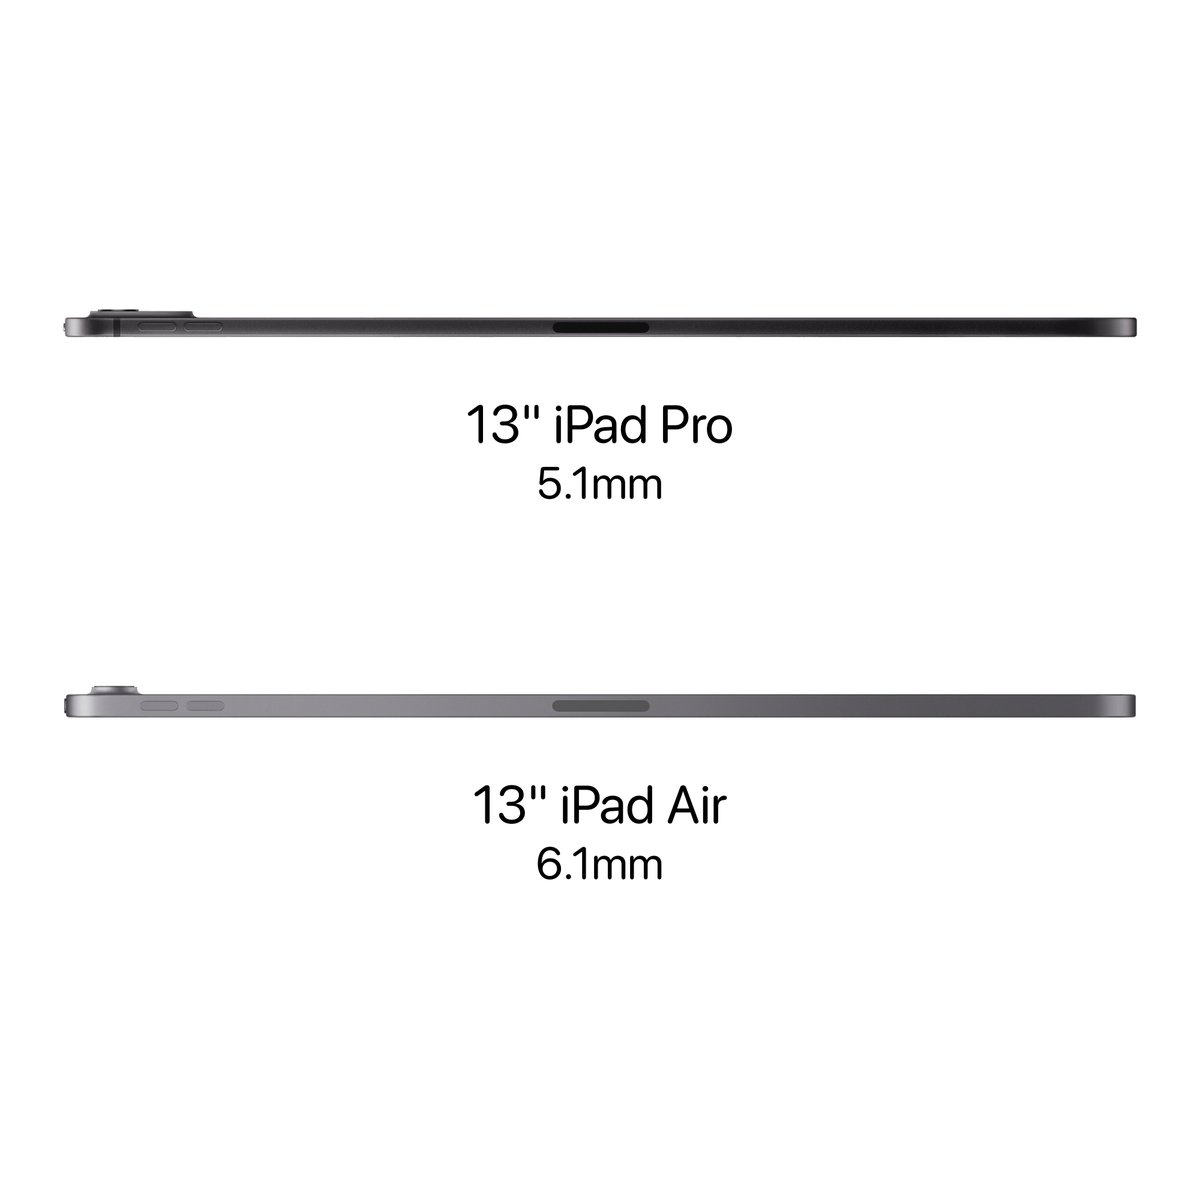 The iPad Pro is now thinner than the iPad Air 

So why is it still called “Air”? The iPad lineup still seems like a mess